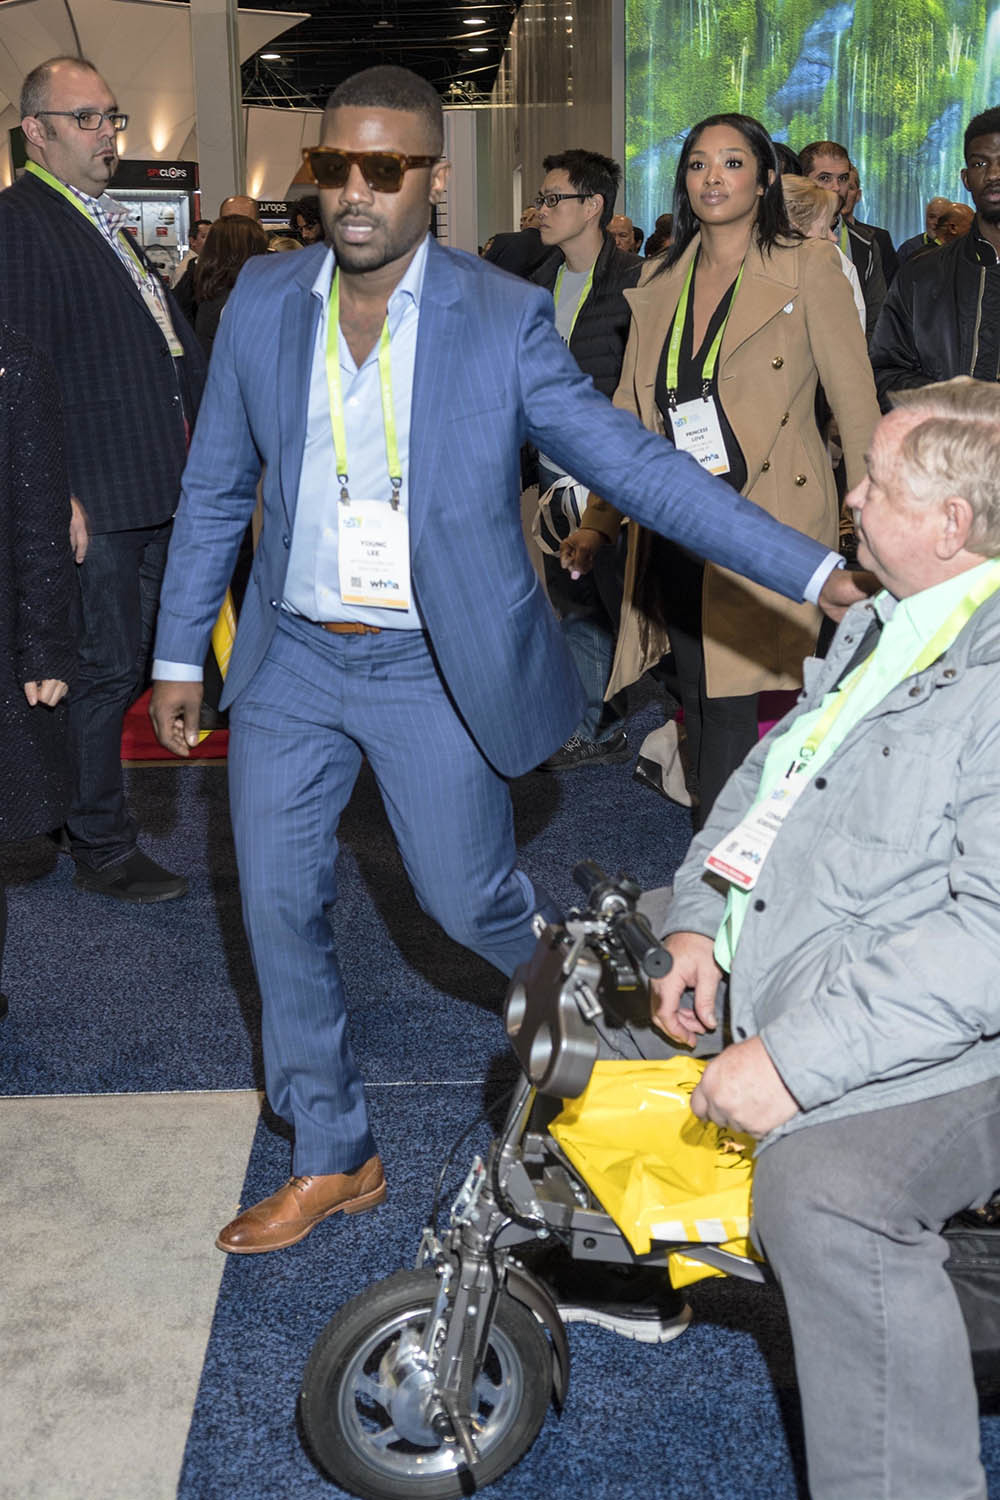 Ray J and Princess Love at CES 2018 in Las Vegas